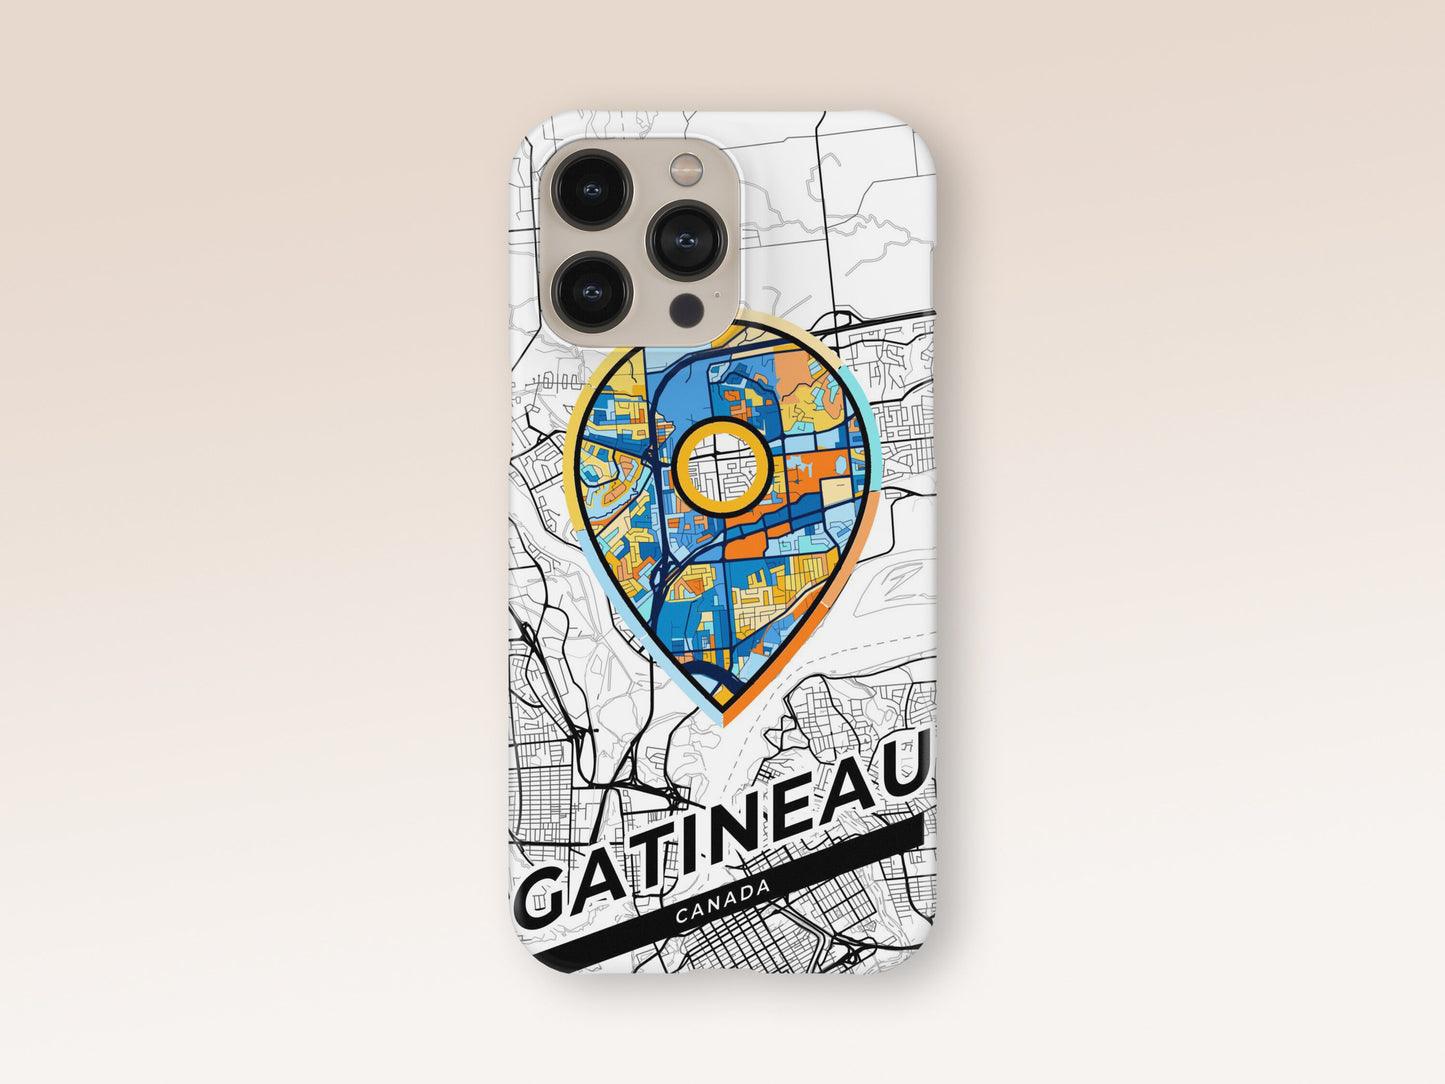 Gatineau Canada slim phone case with colorful icon. Birthday, wedding or housewarming gift. Couple match cases. 1